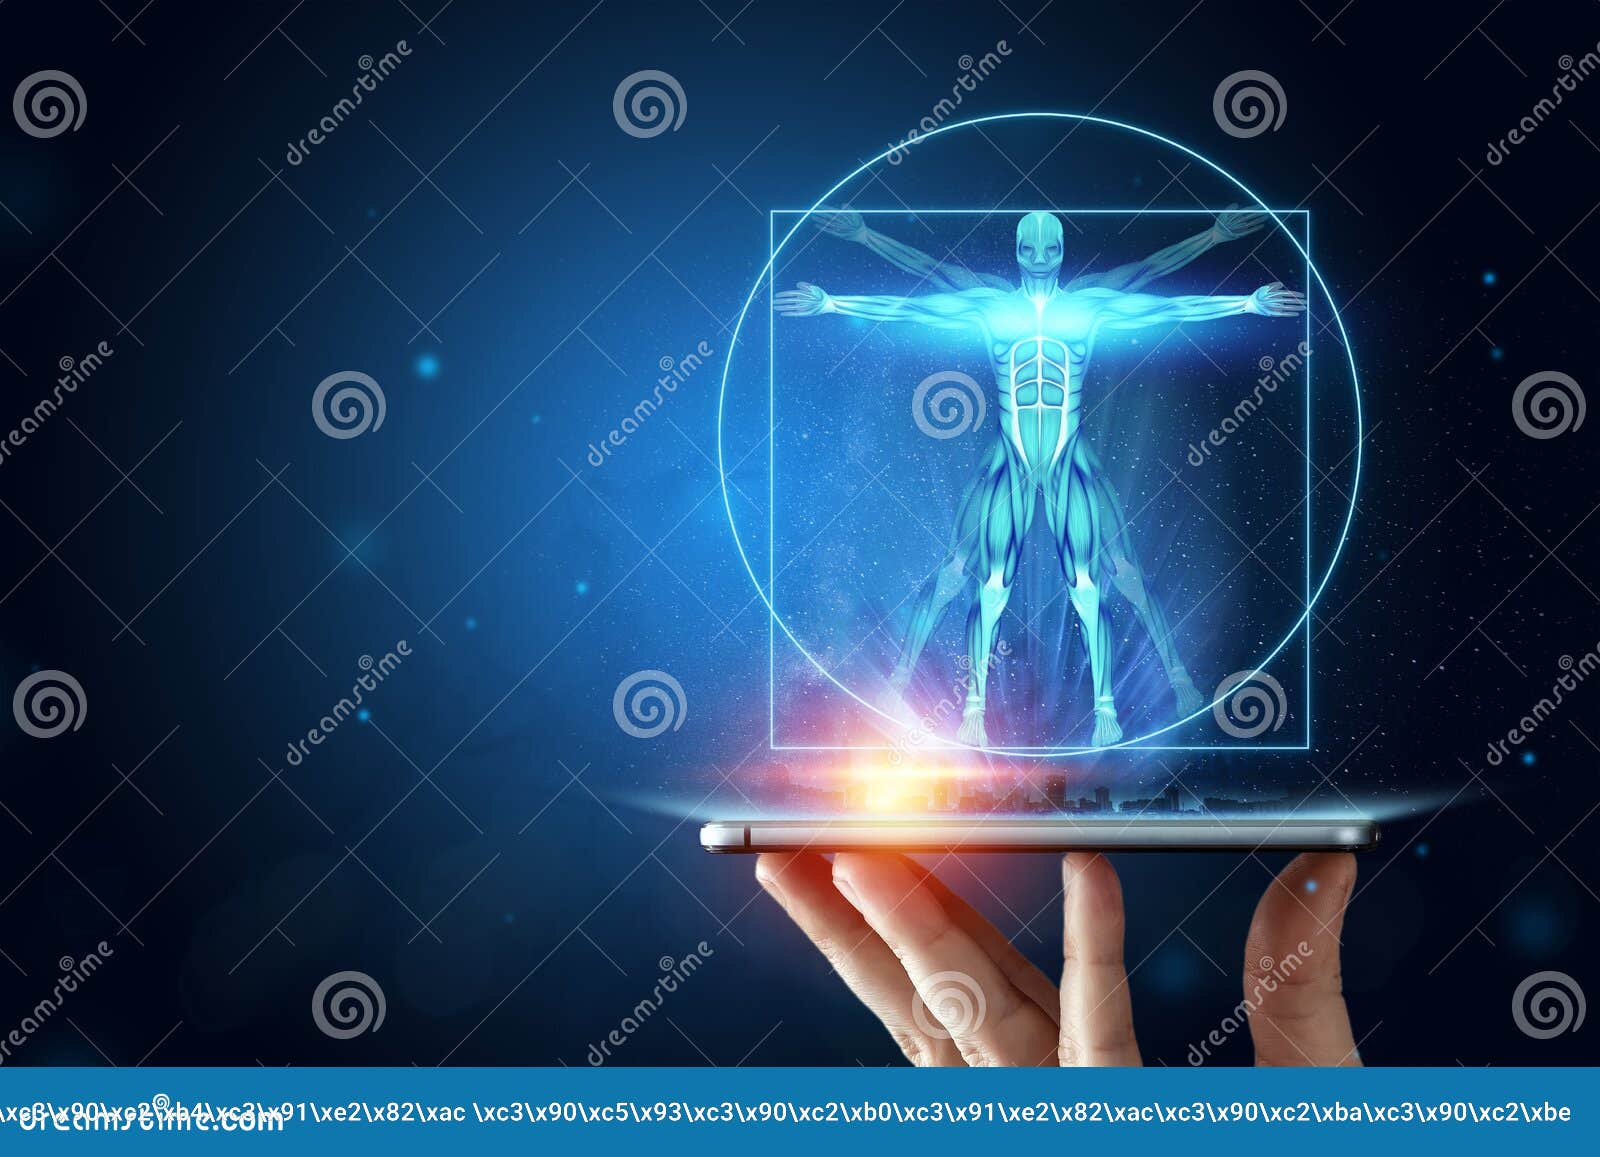 hologram vitruvian man, the structure of human muscles, biology of the muscular system. human anotomy concept